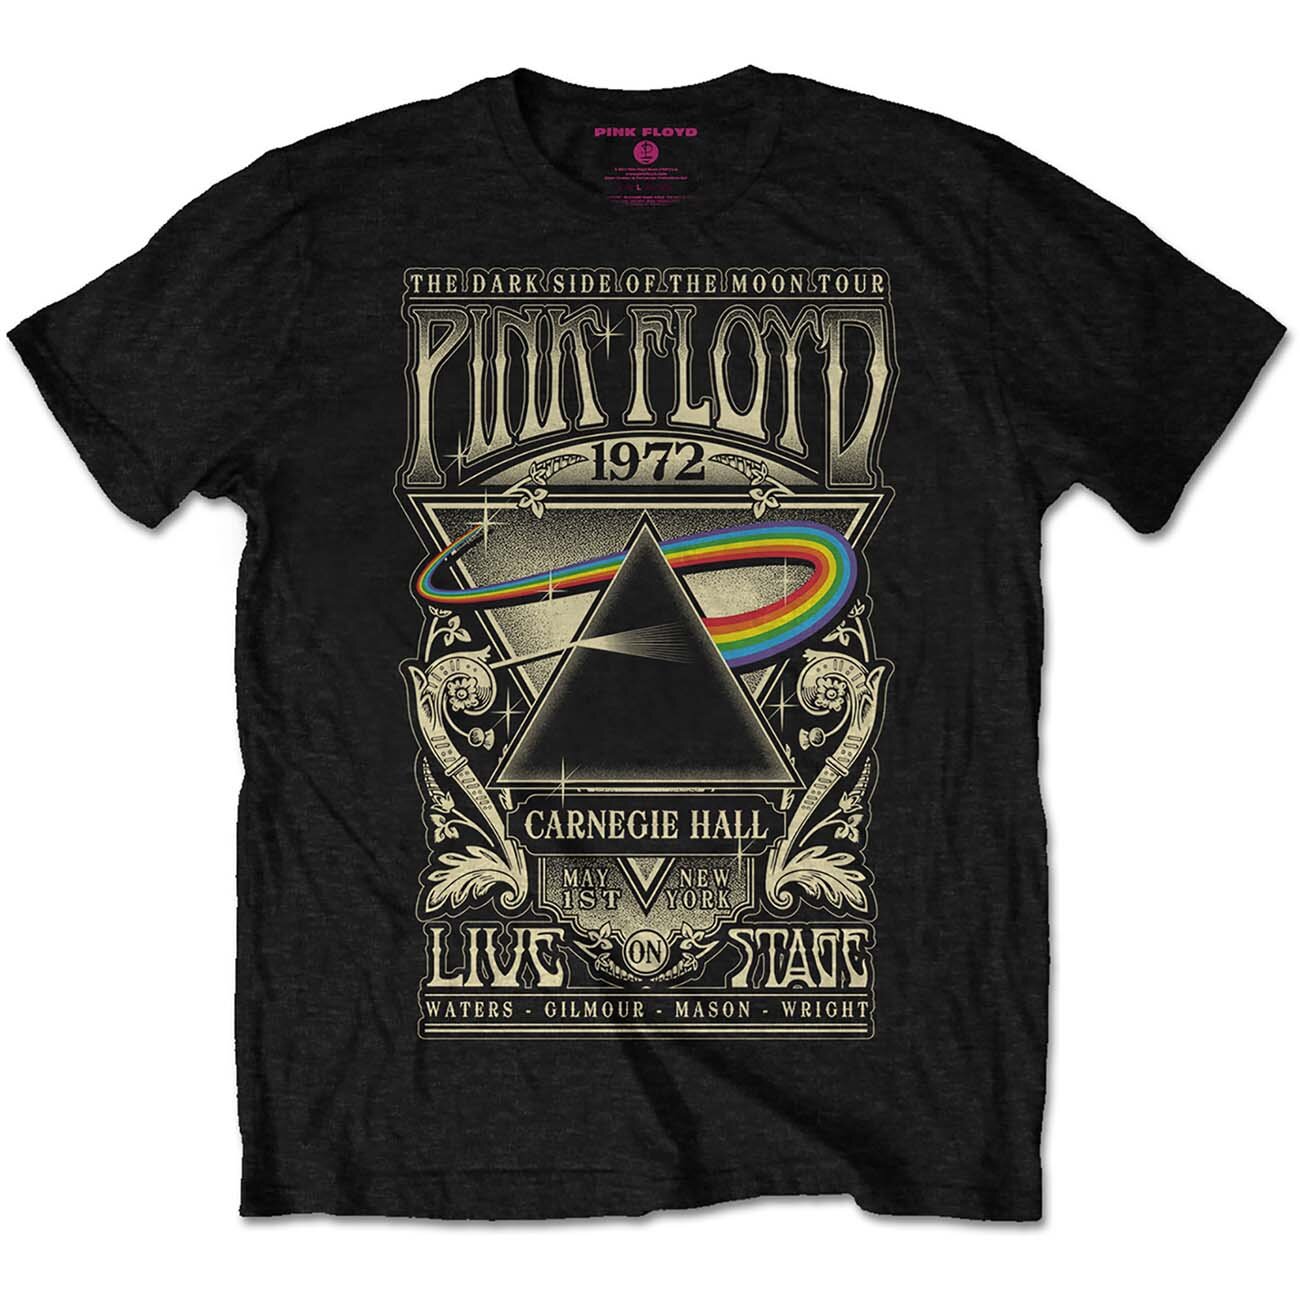 Rockoff T-Shirt Pink Floyd Carnegie Hall Poster Size XL : photo 1